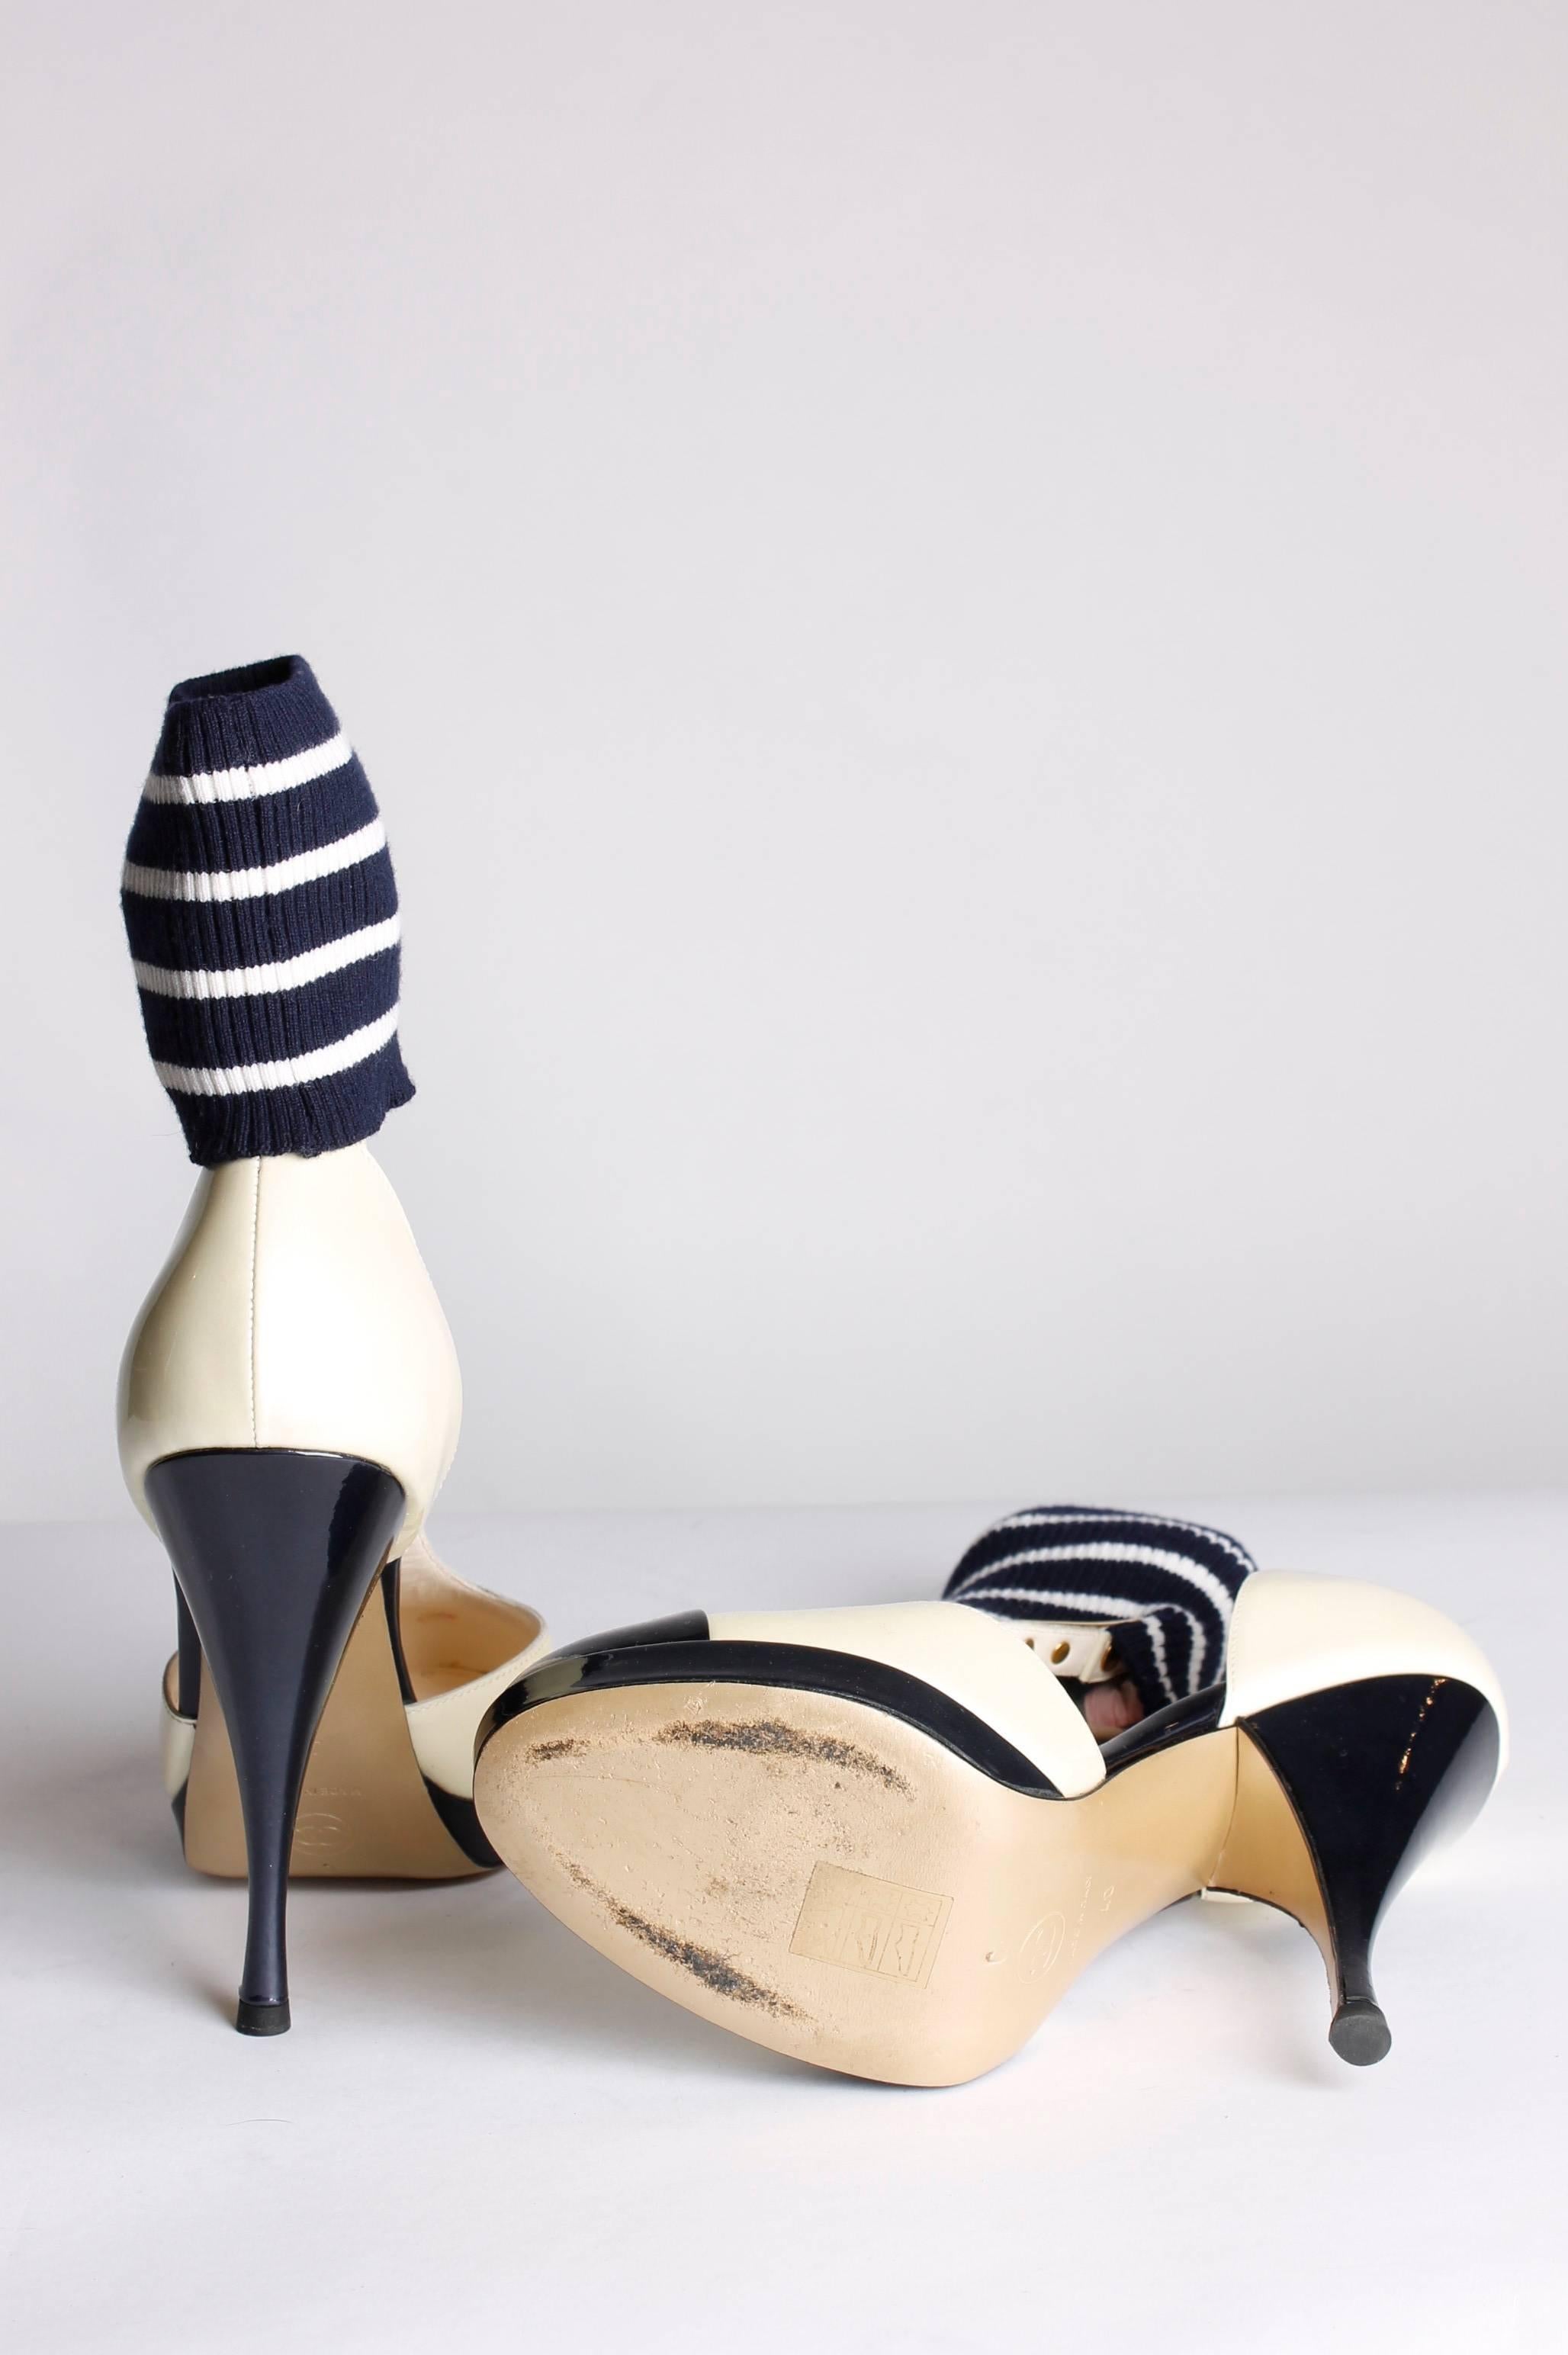 This pair is very special, Chanel pumps with a cuff around the ankle. Nice!

Made of patent leather in champagne cream and dark navy blue. A strap across the foot that holds a cuff. This knitted ankle cuff is striped in navy blue and white. An